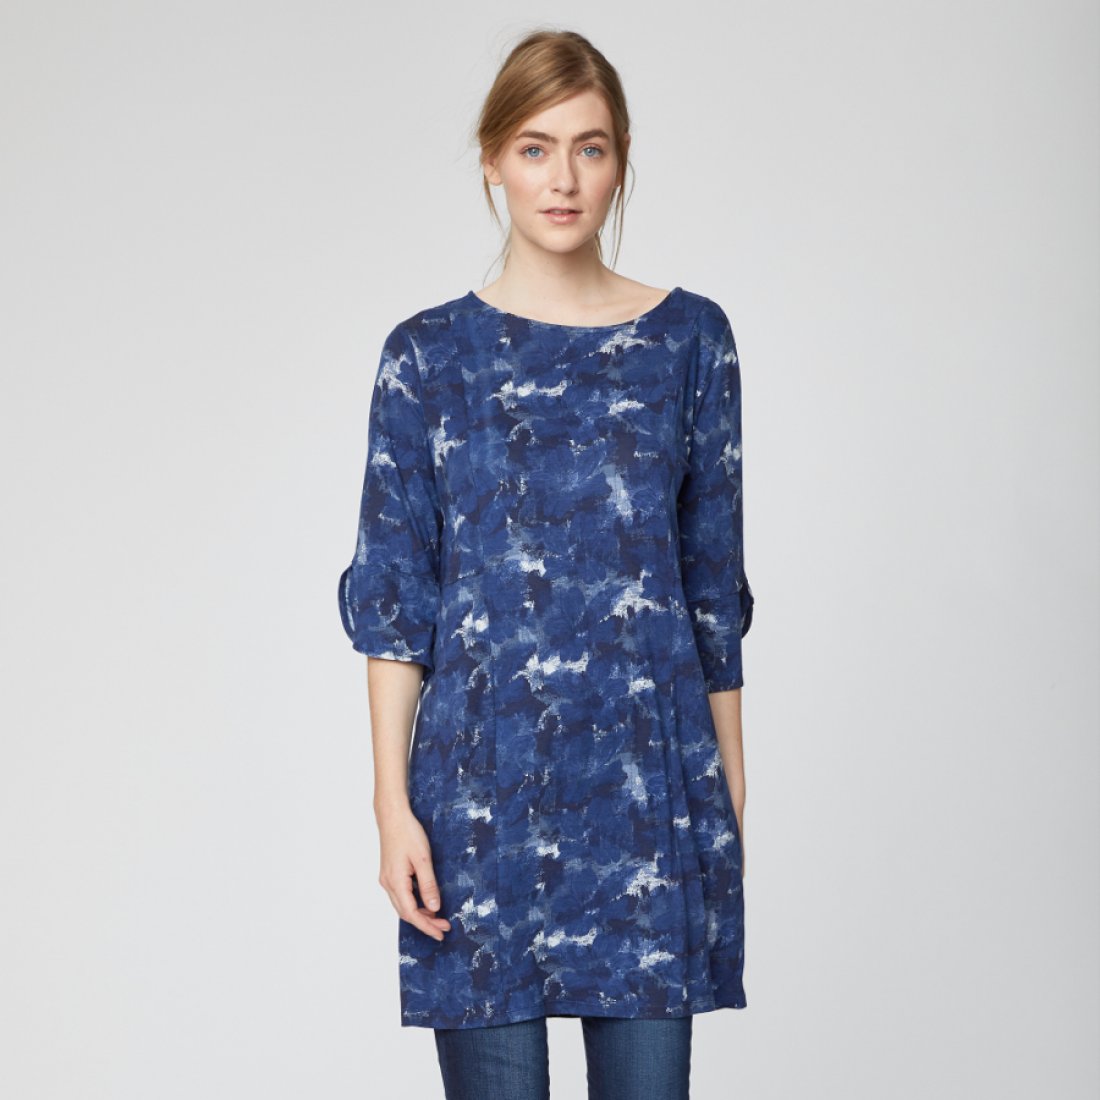 Thought Ocean Blue Moreno Dress - Thought